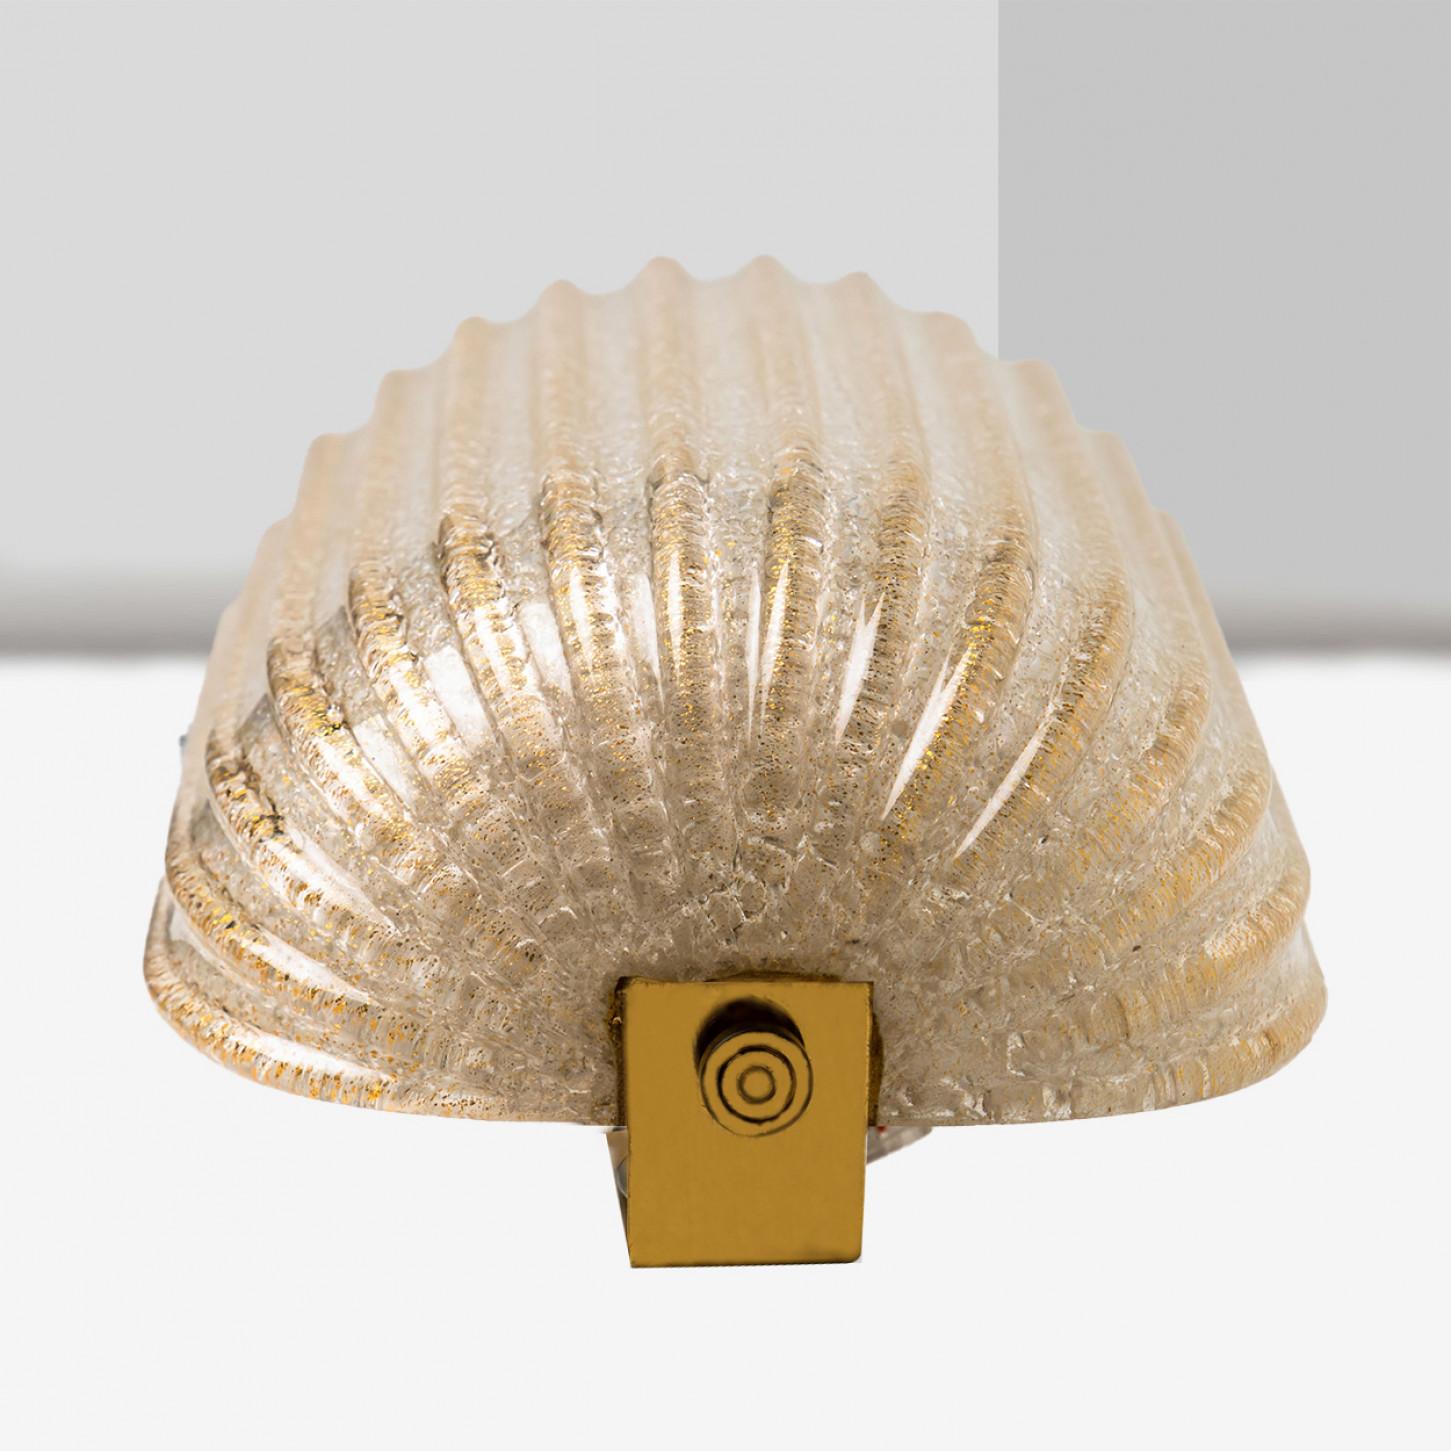 1 of 2 Fluted Murano Glass Wall Sconces Barovier, Italy, 1960s For Sale 3